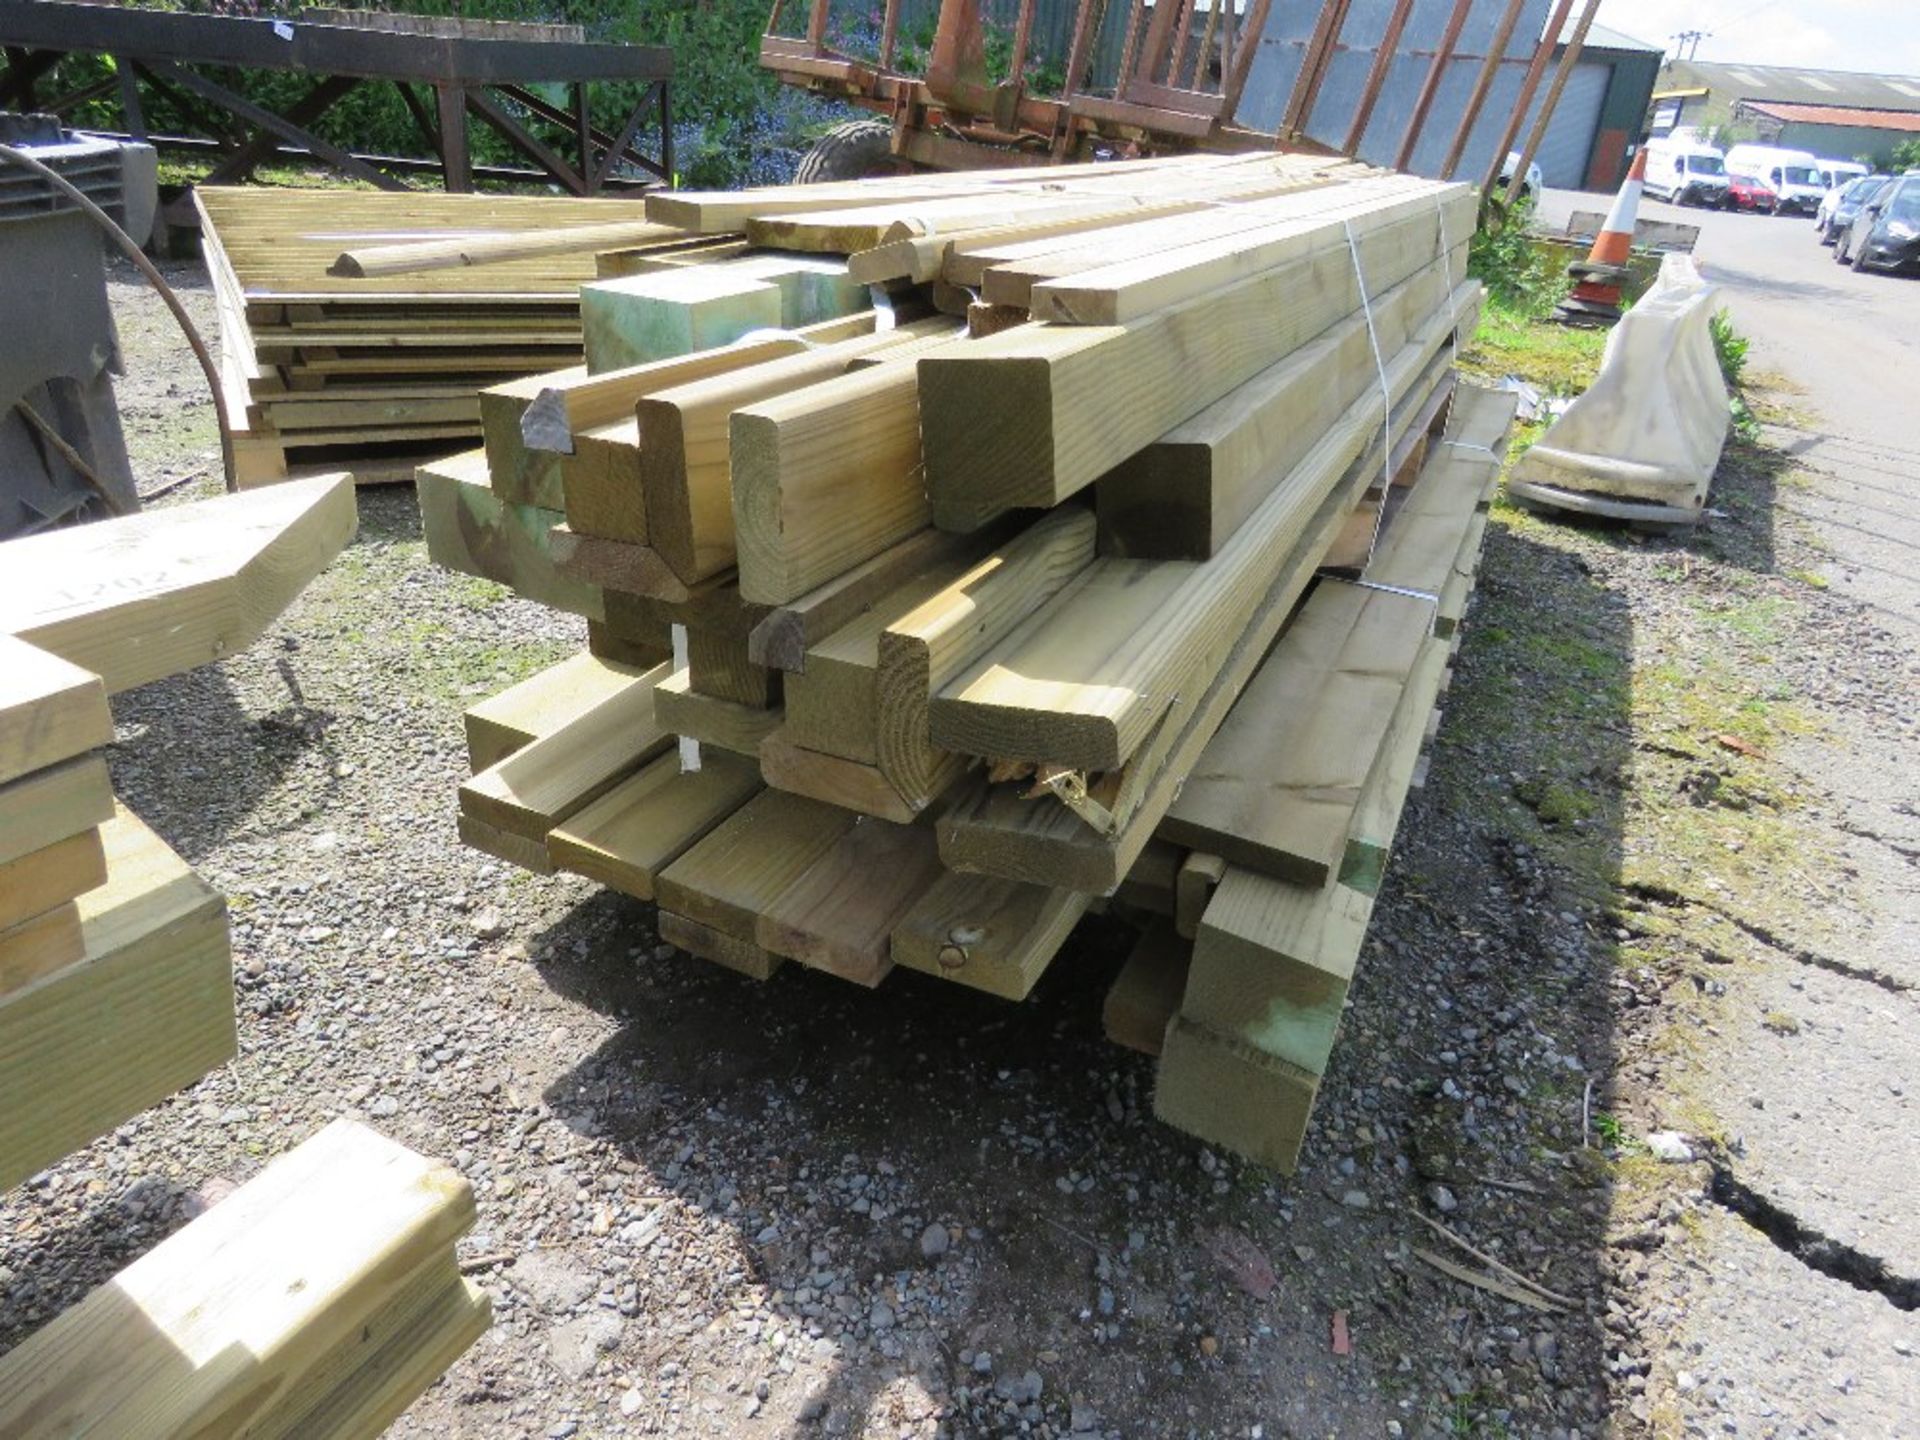 2 X BUNDLES OF TREATED FENCING TIMBERS, POSTS AND BOARDS AS SHOWN, 7-10FT LENGTH APPROX. - Image 2 of 4